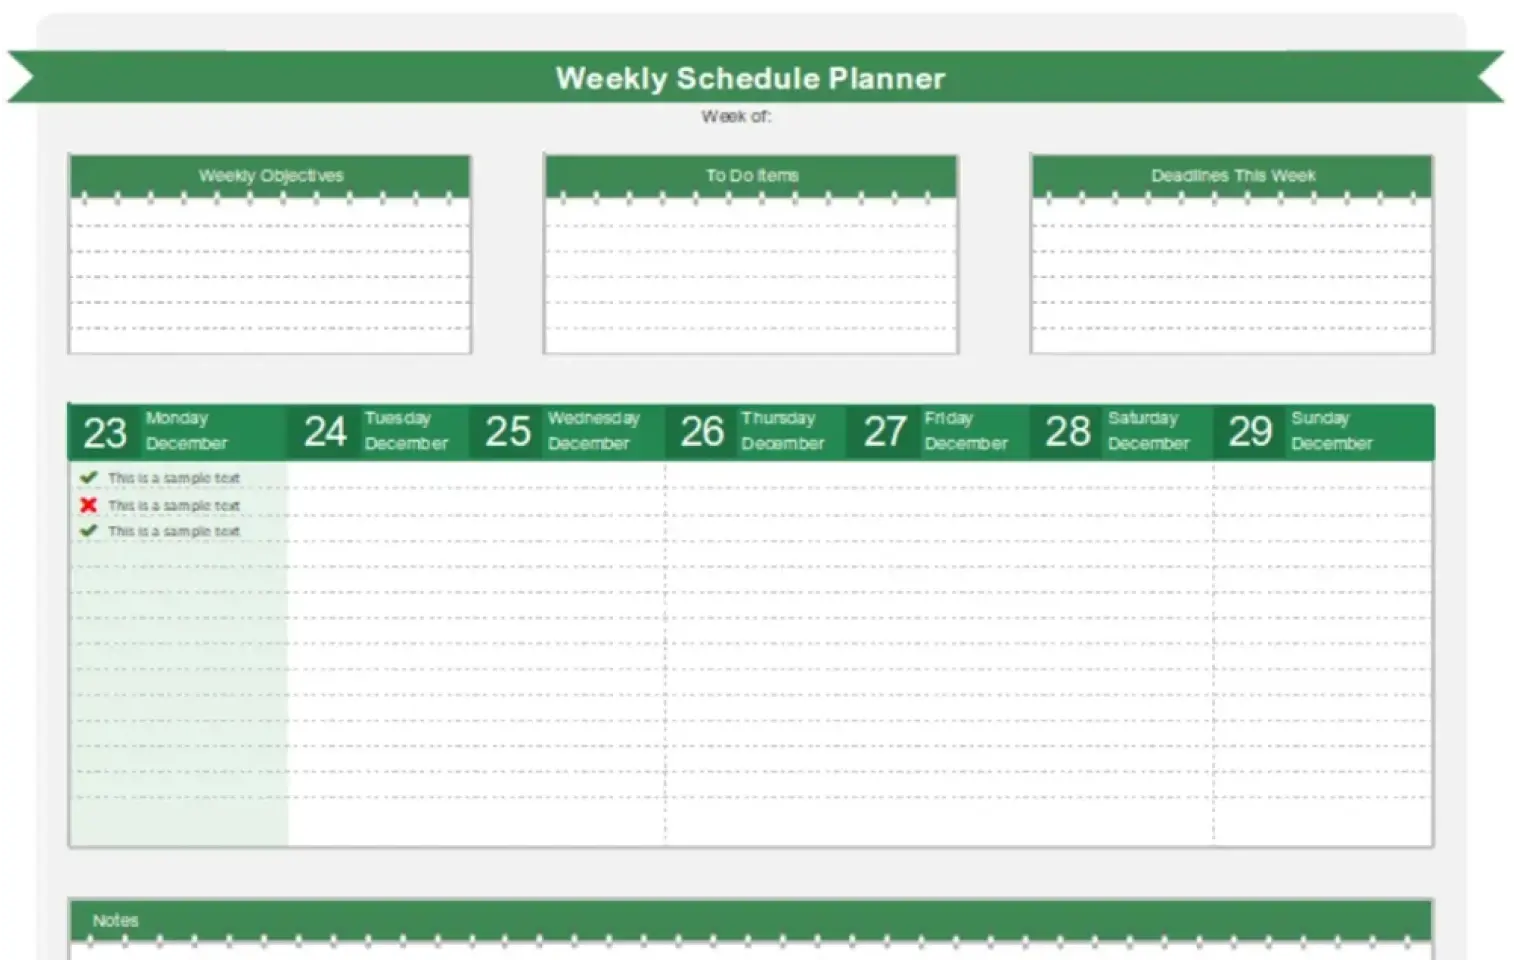 Example of a weekly schedule planning spreadsheet from Microsoft Create.